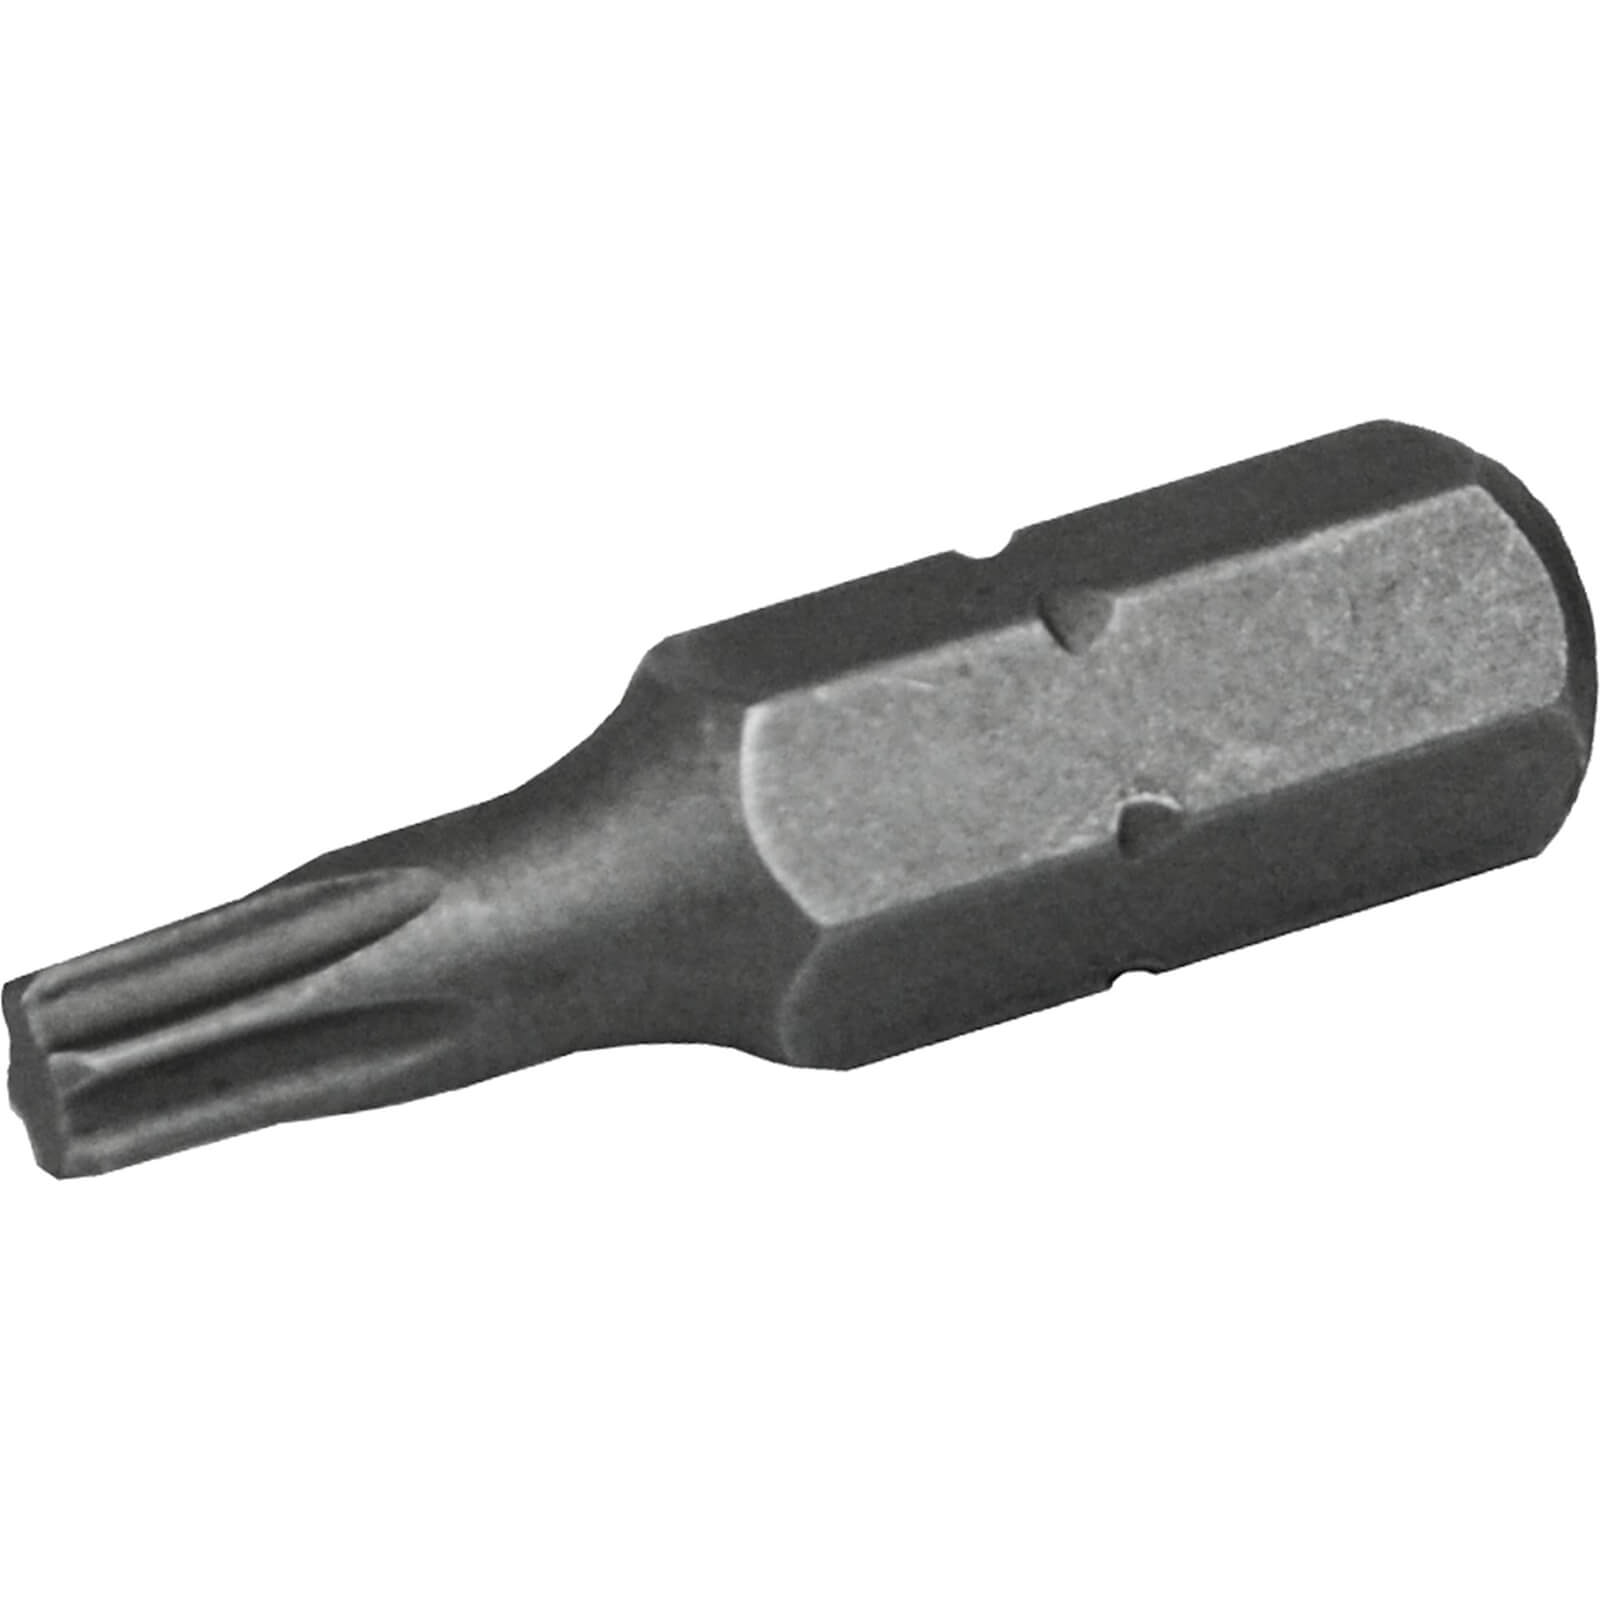 Photos - Bits / Sockets Faithfull Star Security S2 Grade Steel Screwdriver Bits T25 25mm Pack of 3 